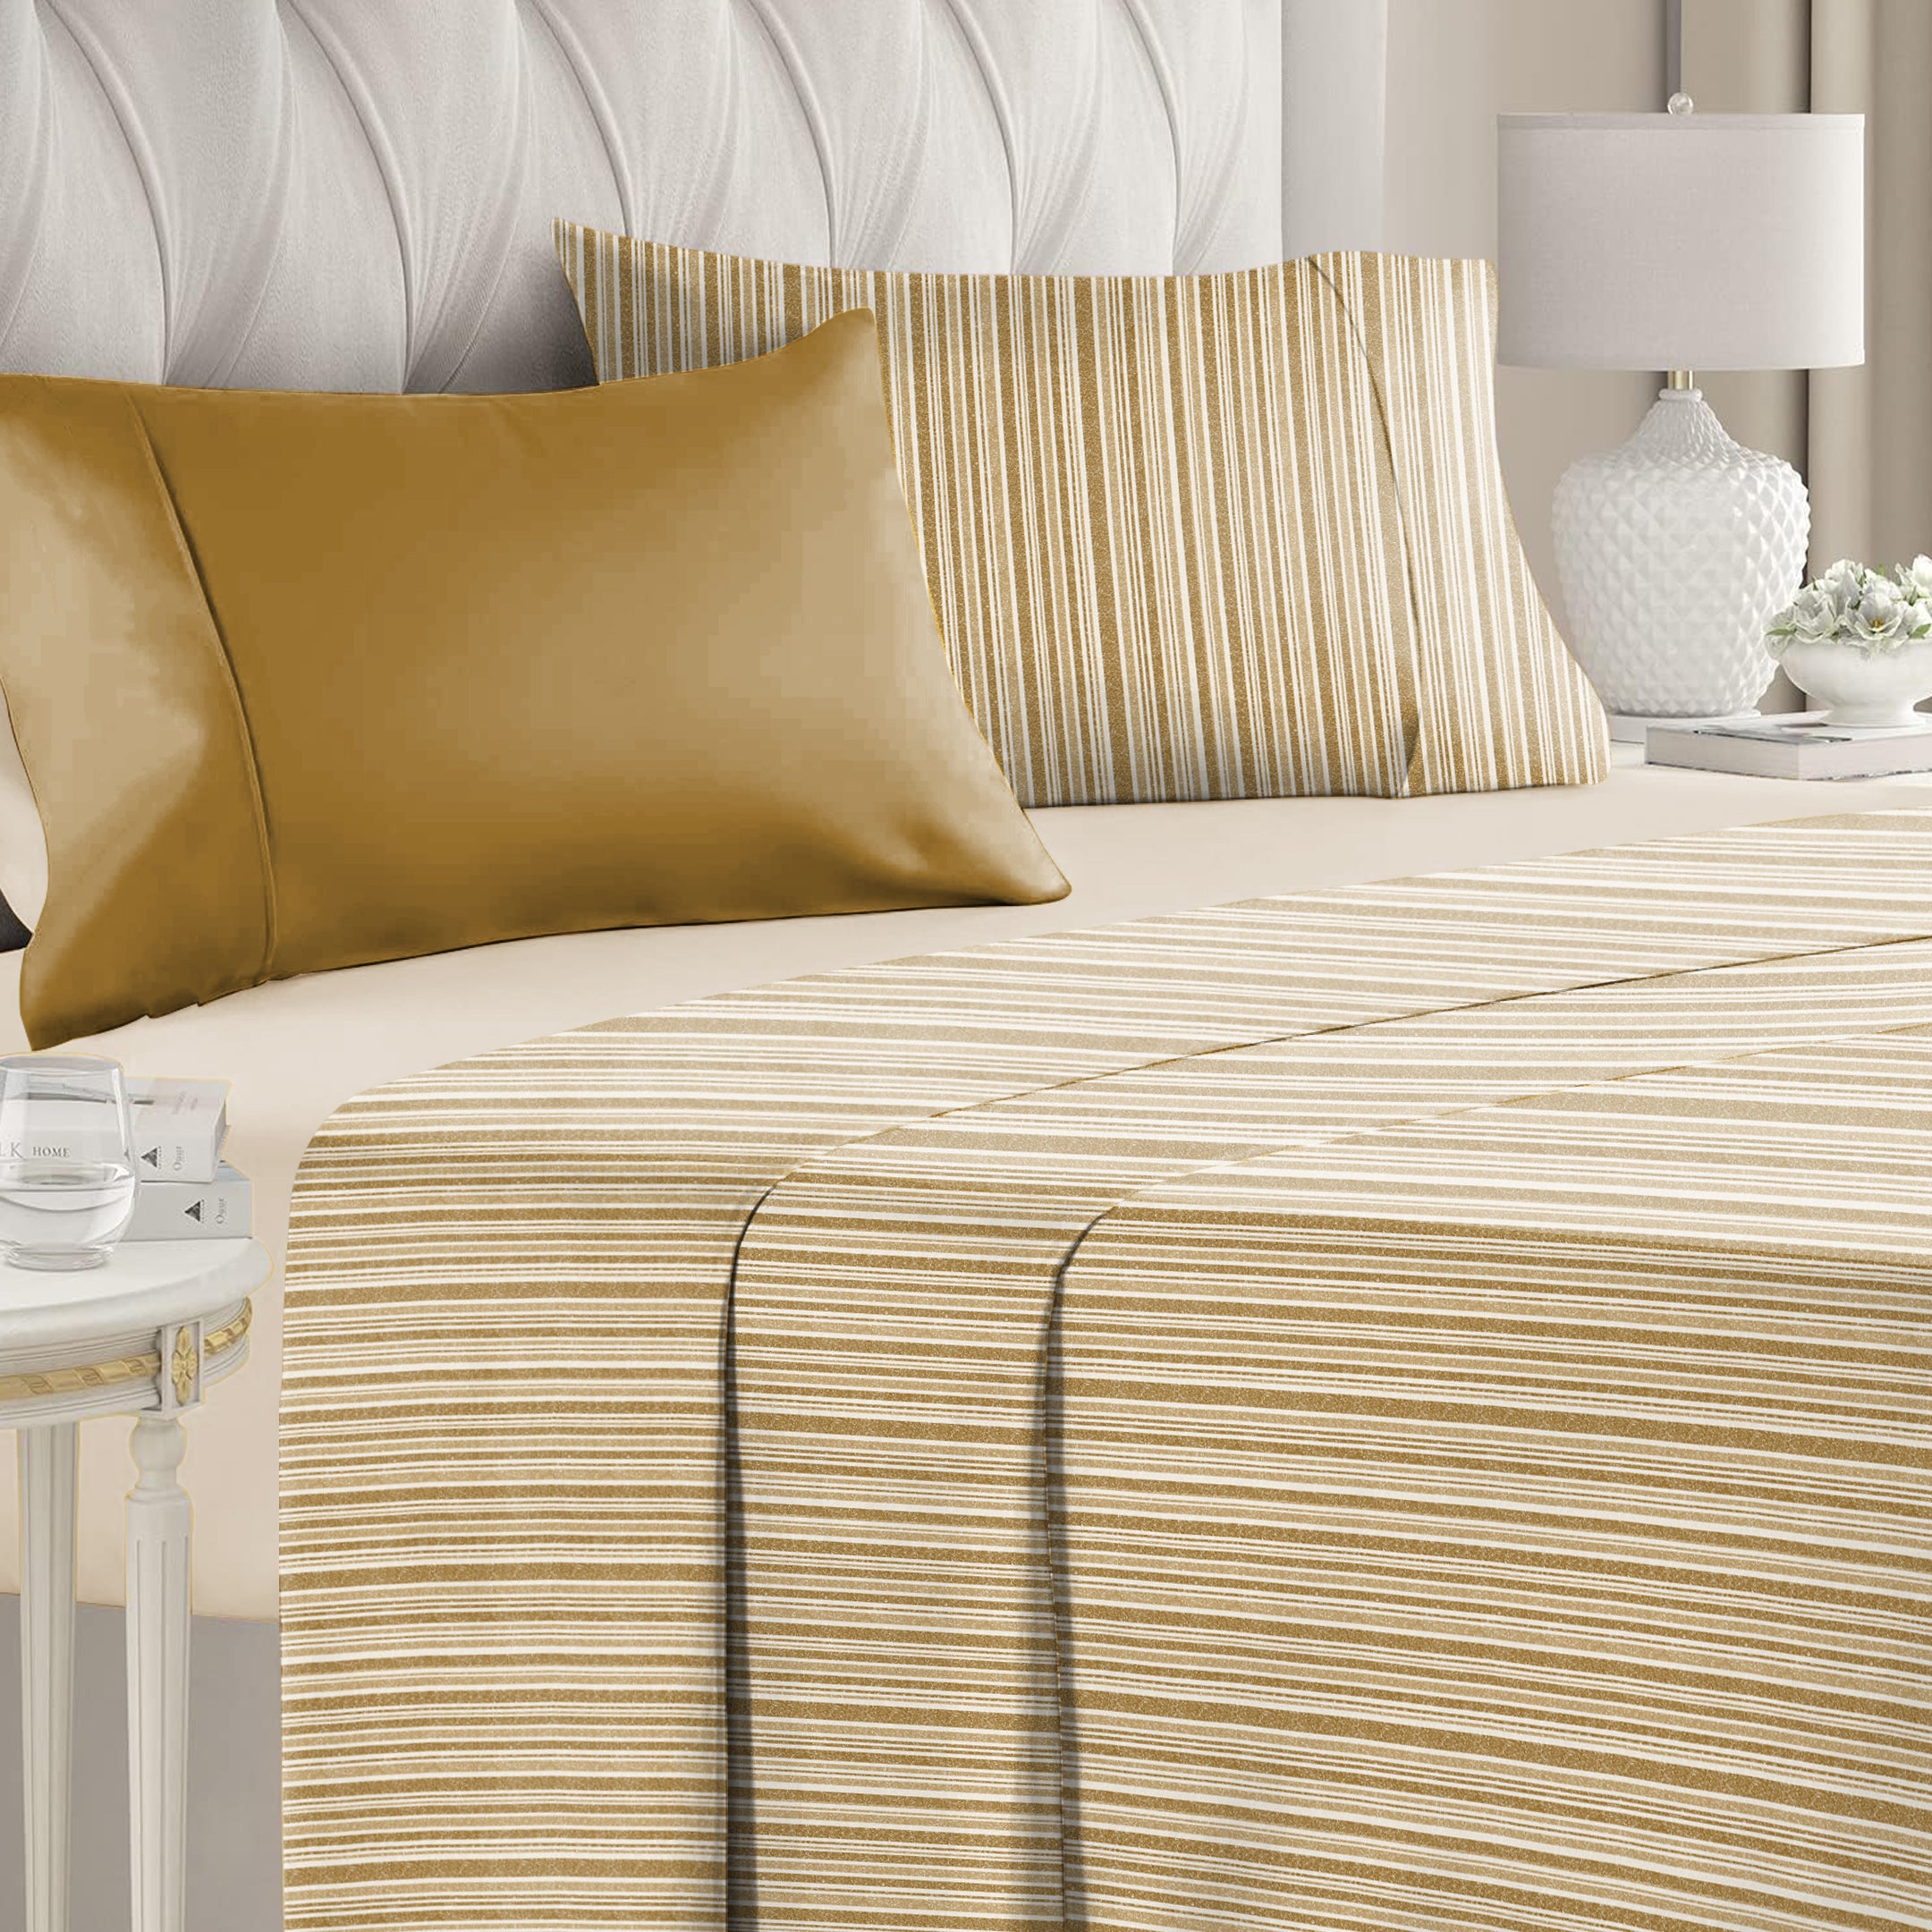 Jodhpur Stripe Bedsheet for Double Bed with 2 PillowCovers King Size (104" X 90") Camel